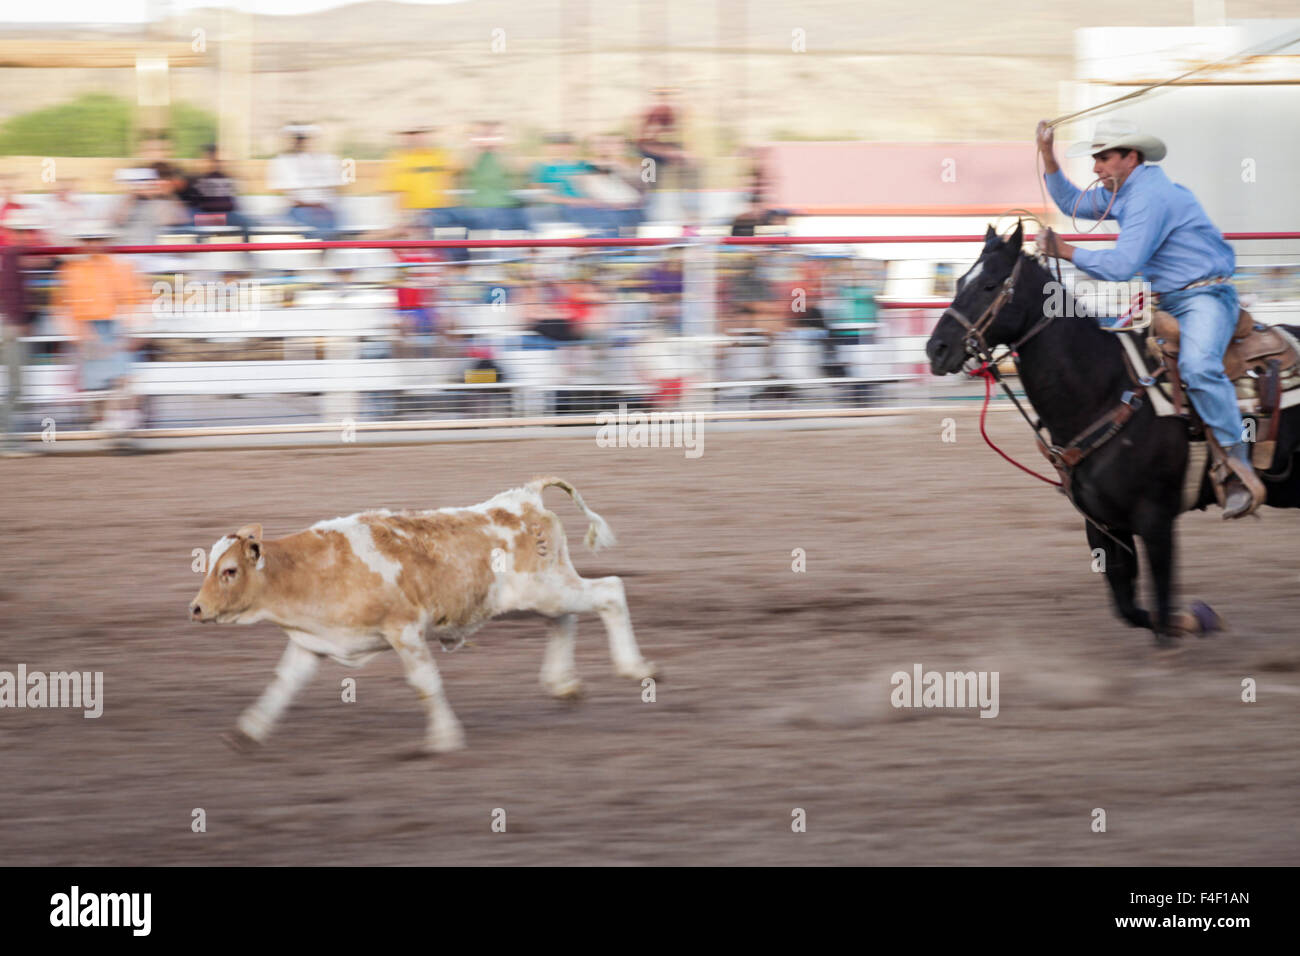 Cattle wrangling competition at the Rodeo, Truth or Consequences, New  Mexico, USA Stock Photo - Alamy